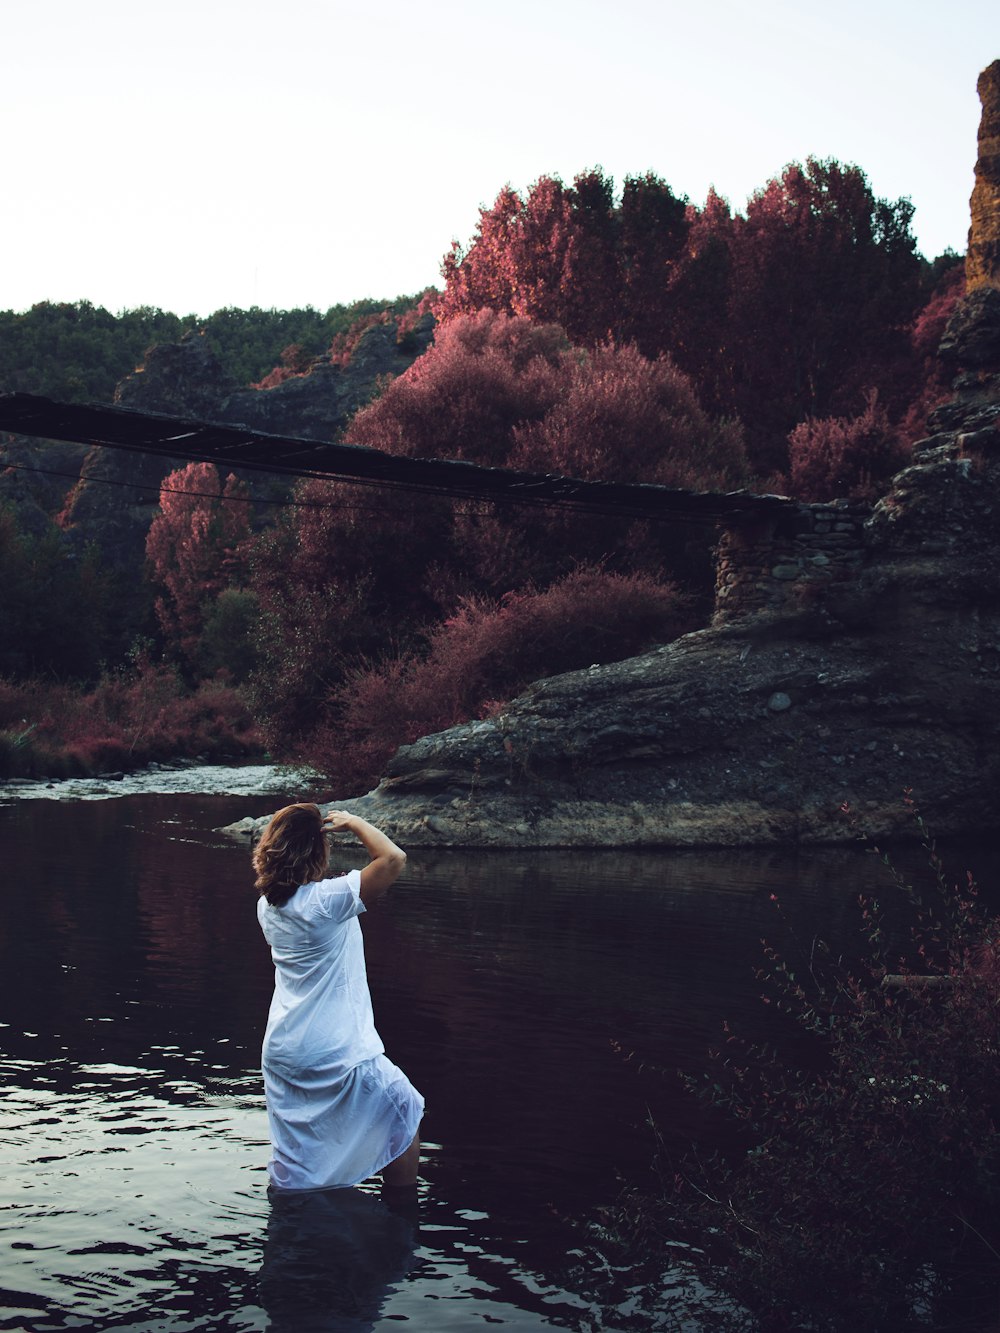 a woman in a white dress standing in a river